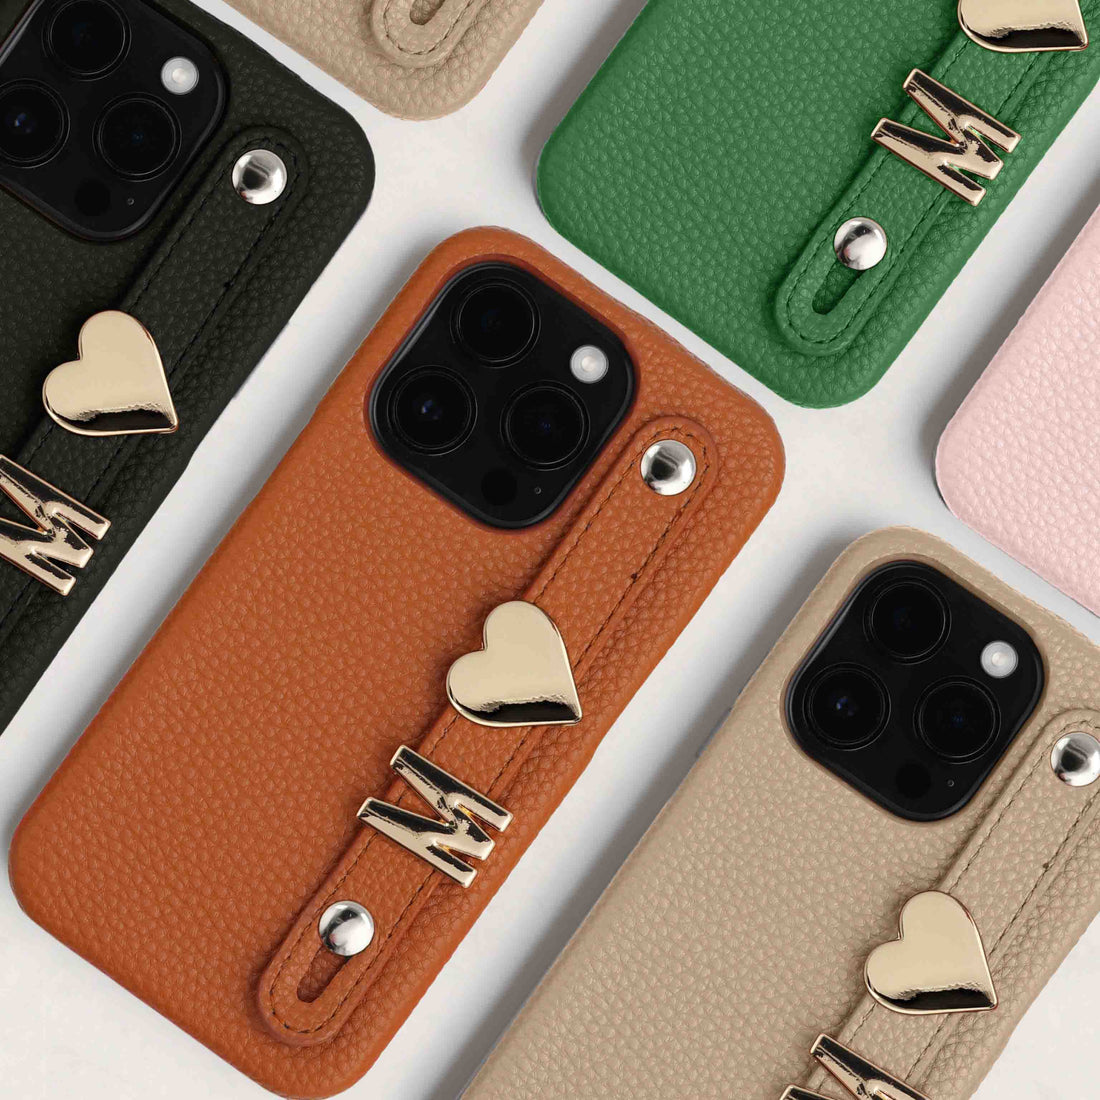 Beige Leather iPhone Case With Strap